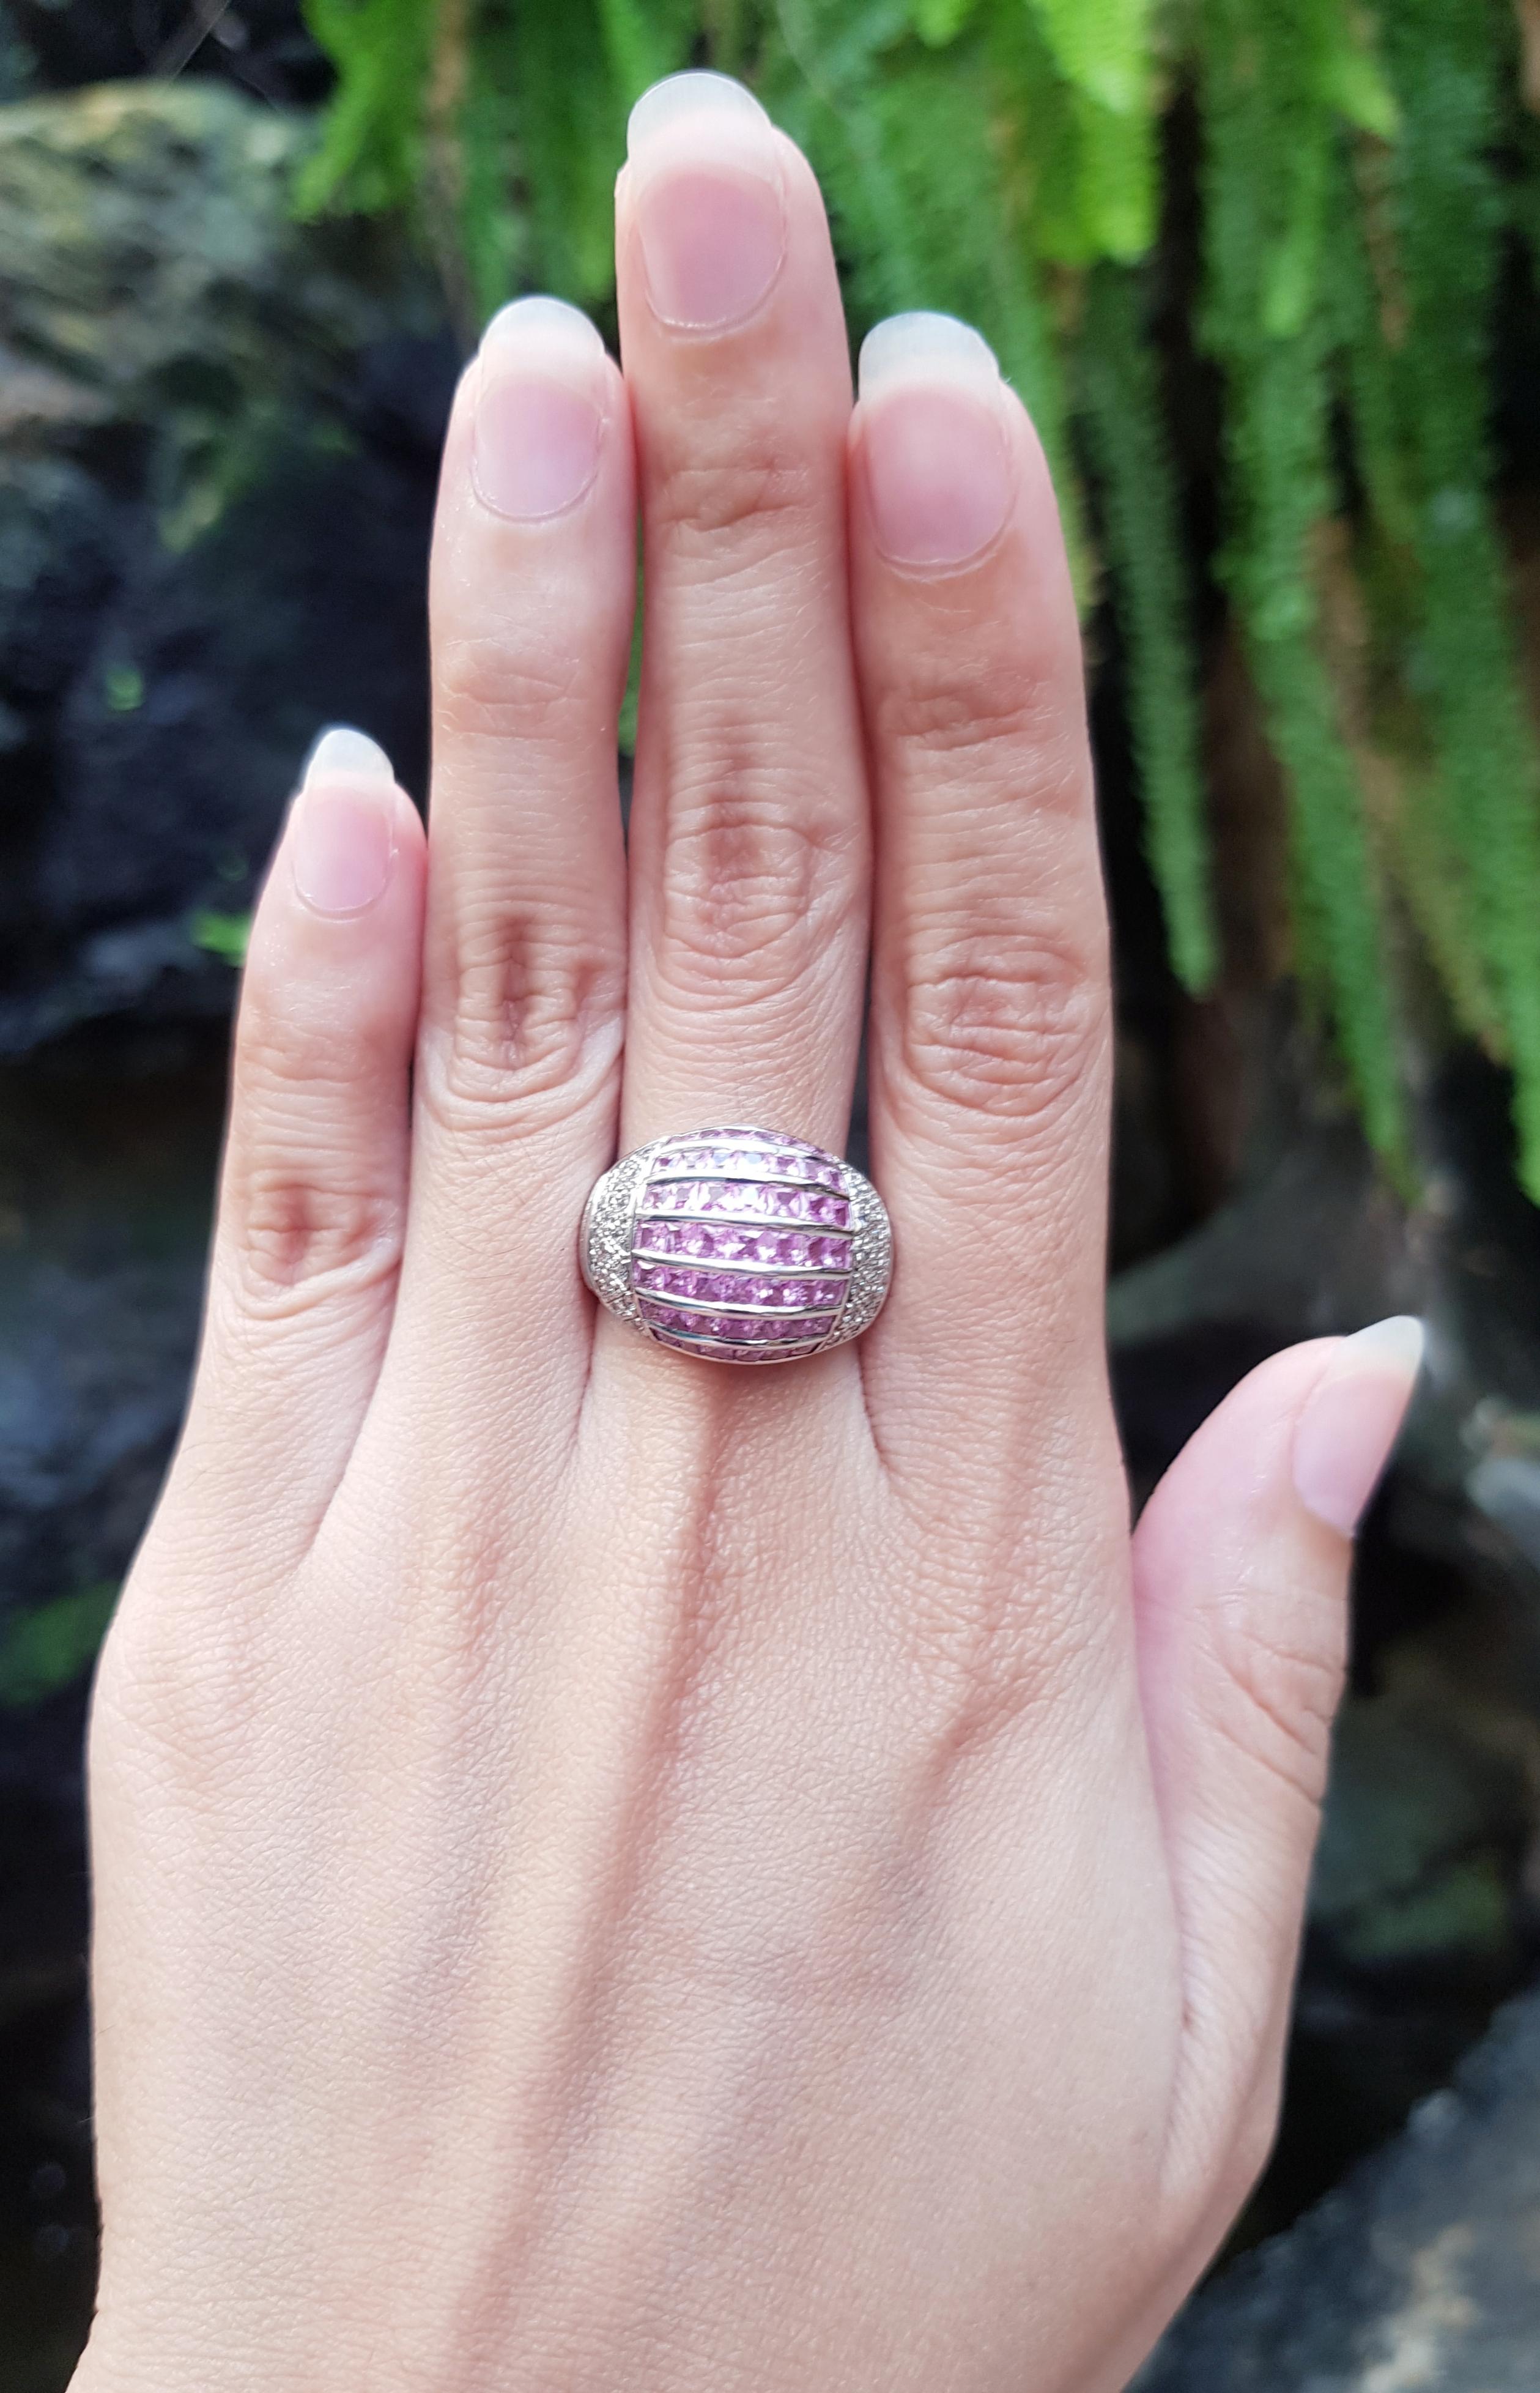 Pink Sapphire with Cubic Zirconia Ring set in Silver Settings

Width:  2.1 cm 
Length: 1.5 cm
Ring Size: 58
Total Weight: 7.75 grams

*Please note that the silver setting is plated with rhodium to promote shine and help prevent oxidation.  However,